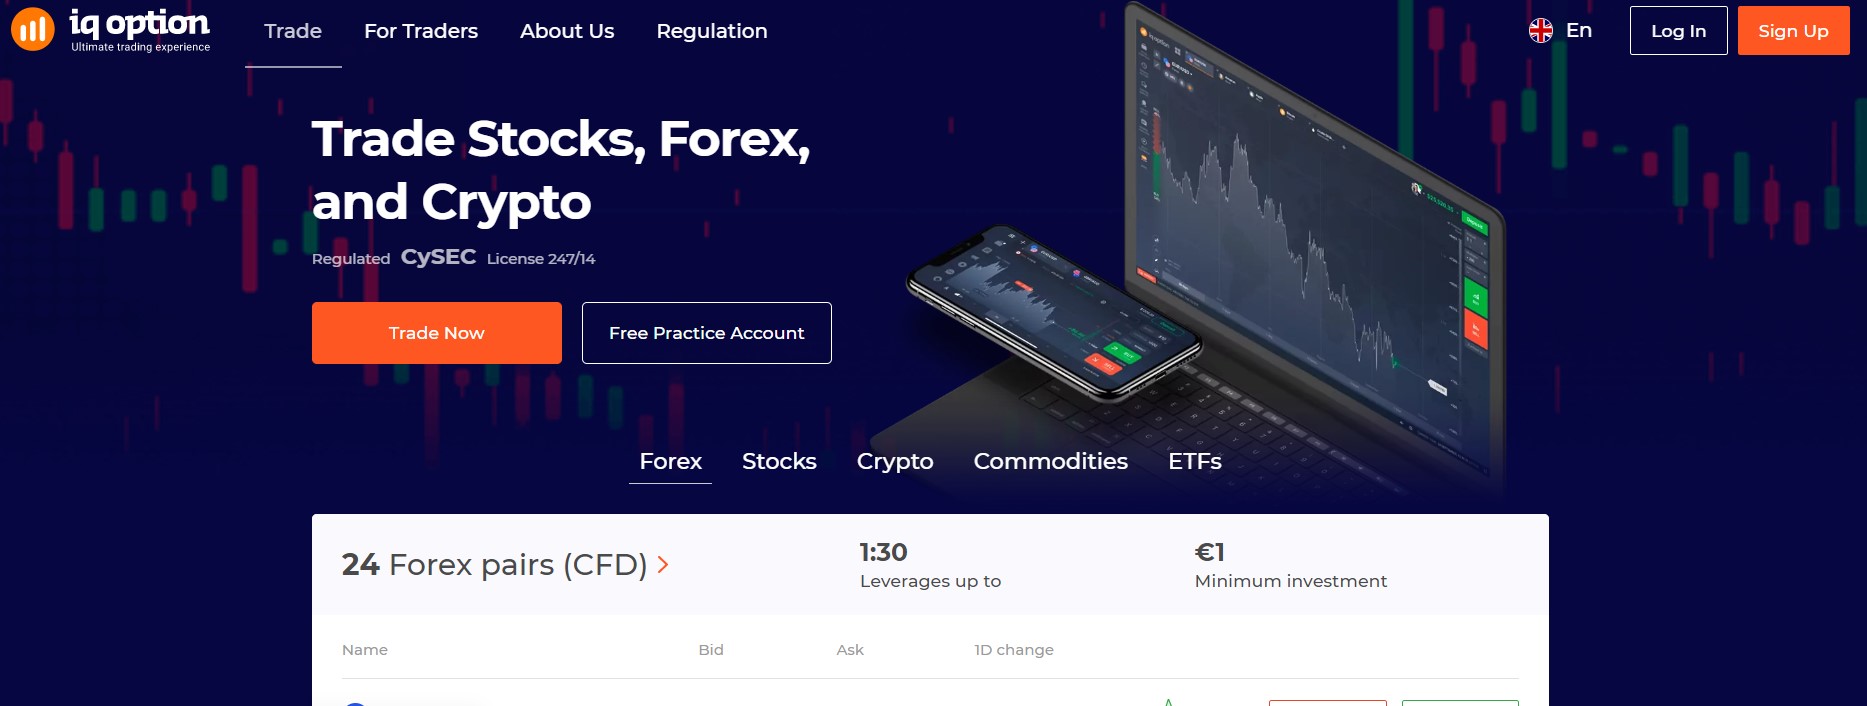 The official website of IQ Option